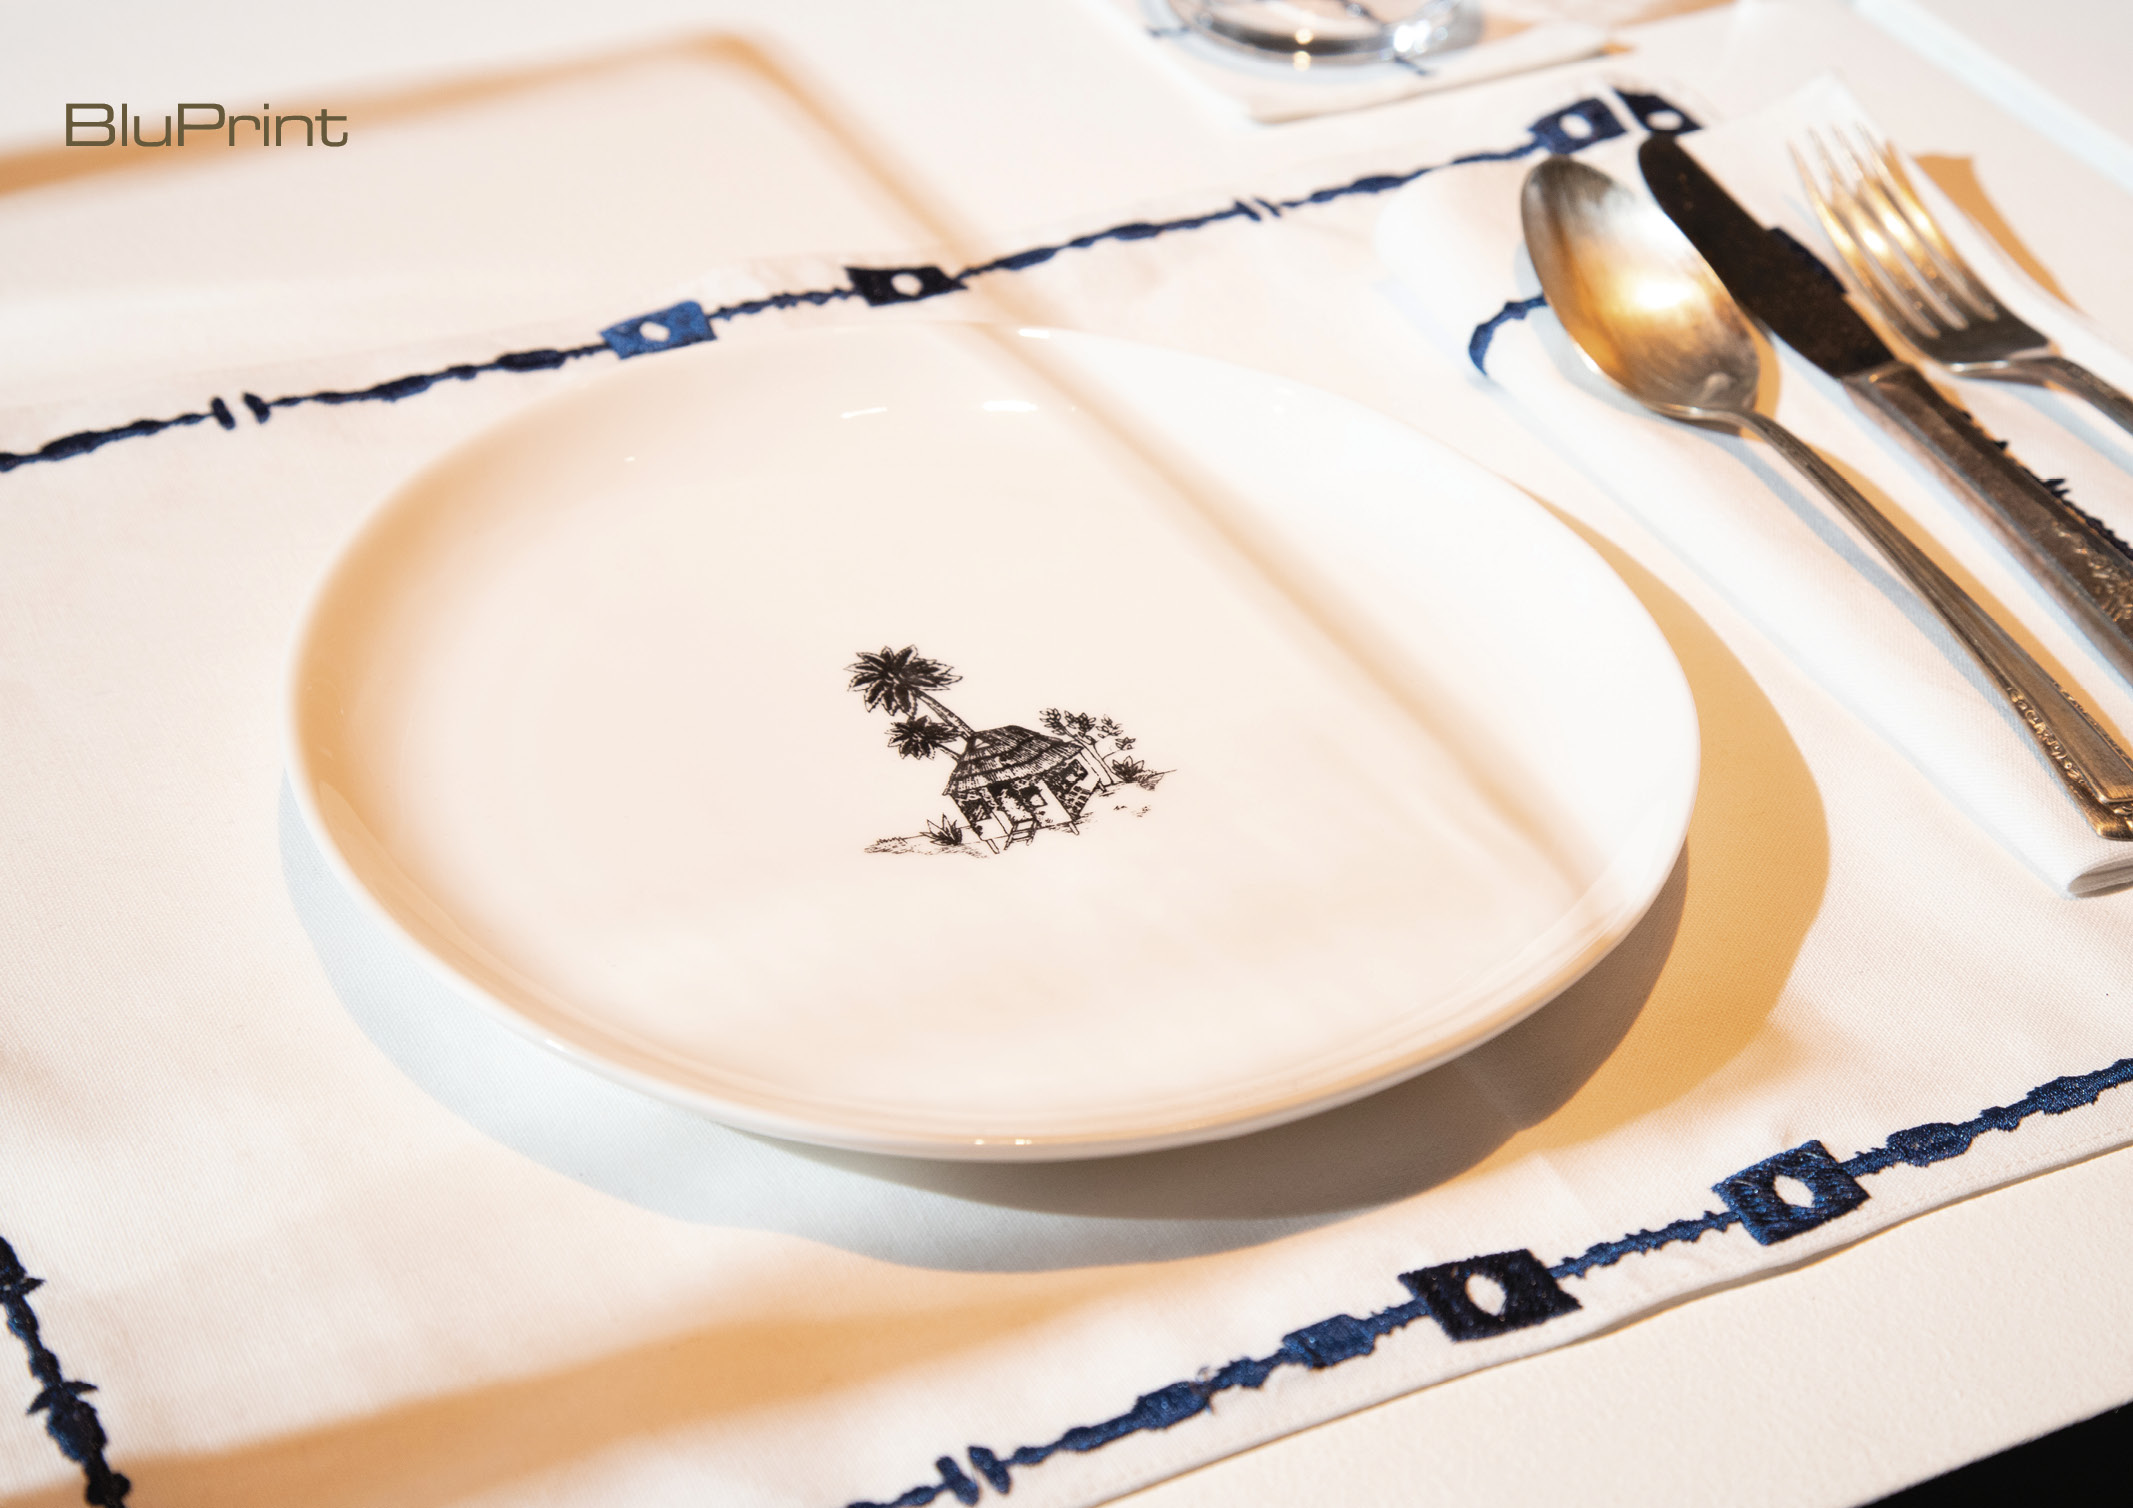 plate featuring a bahay kubo design by Rajo Laurel and Ito Kish